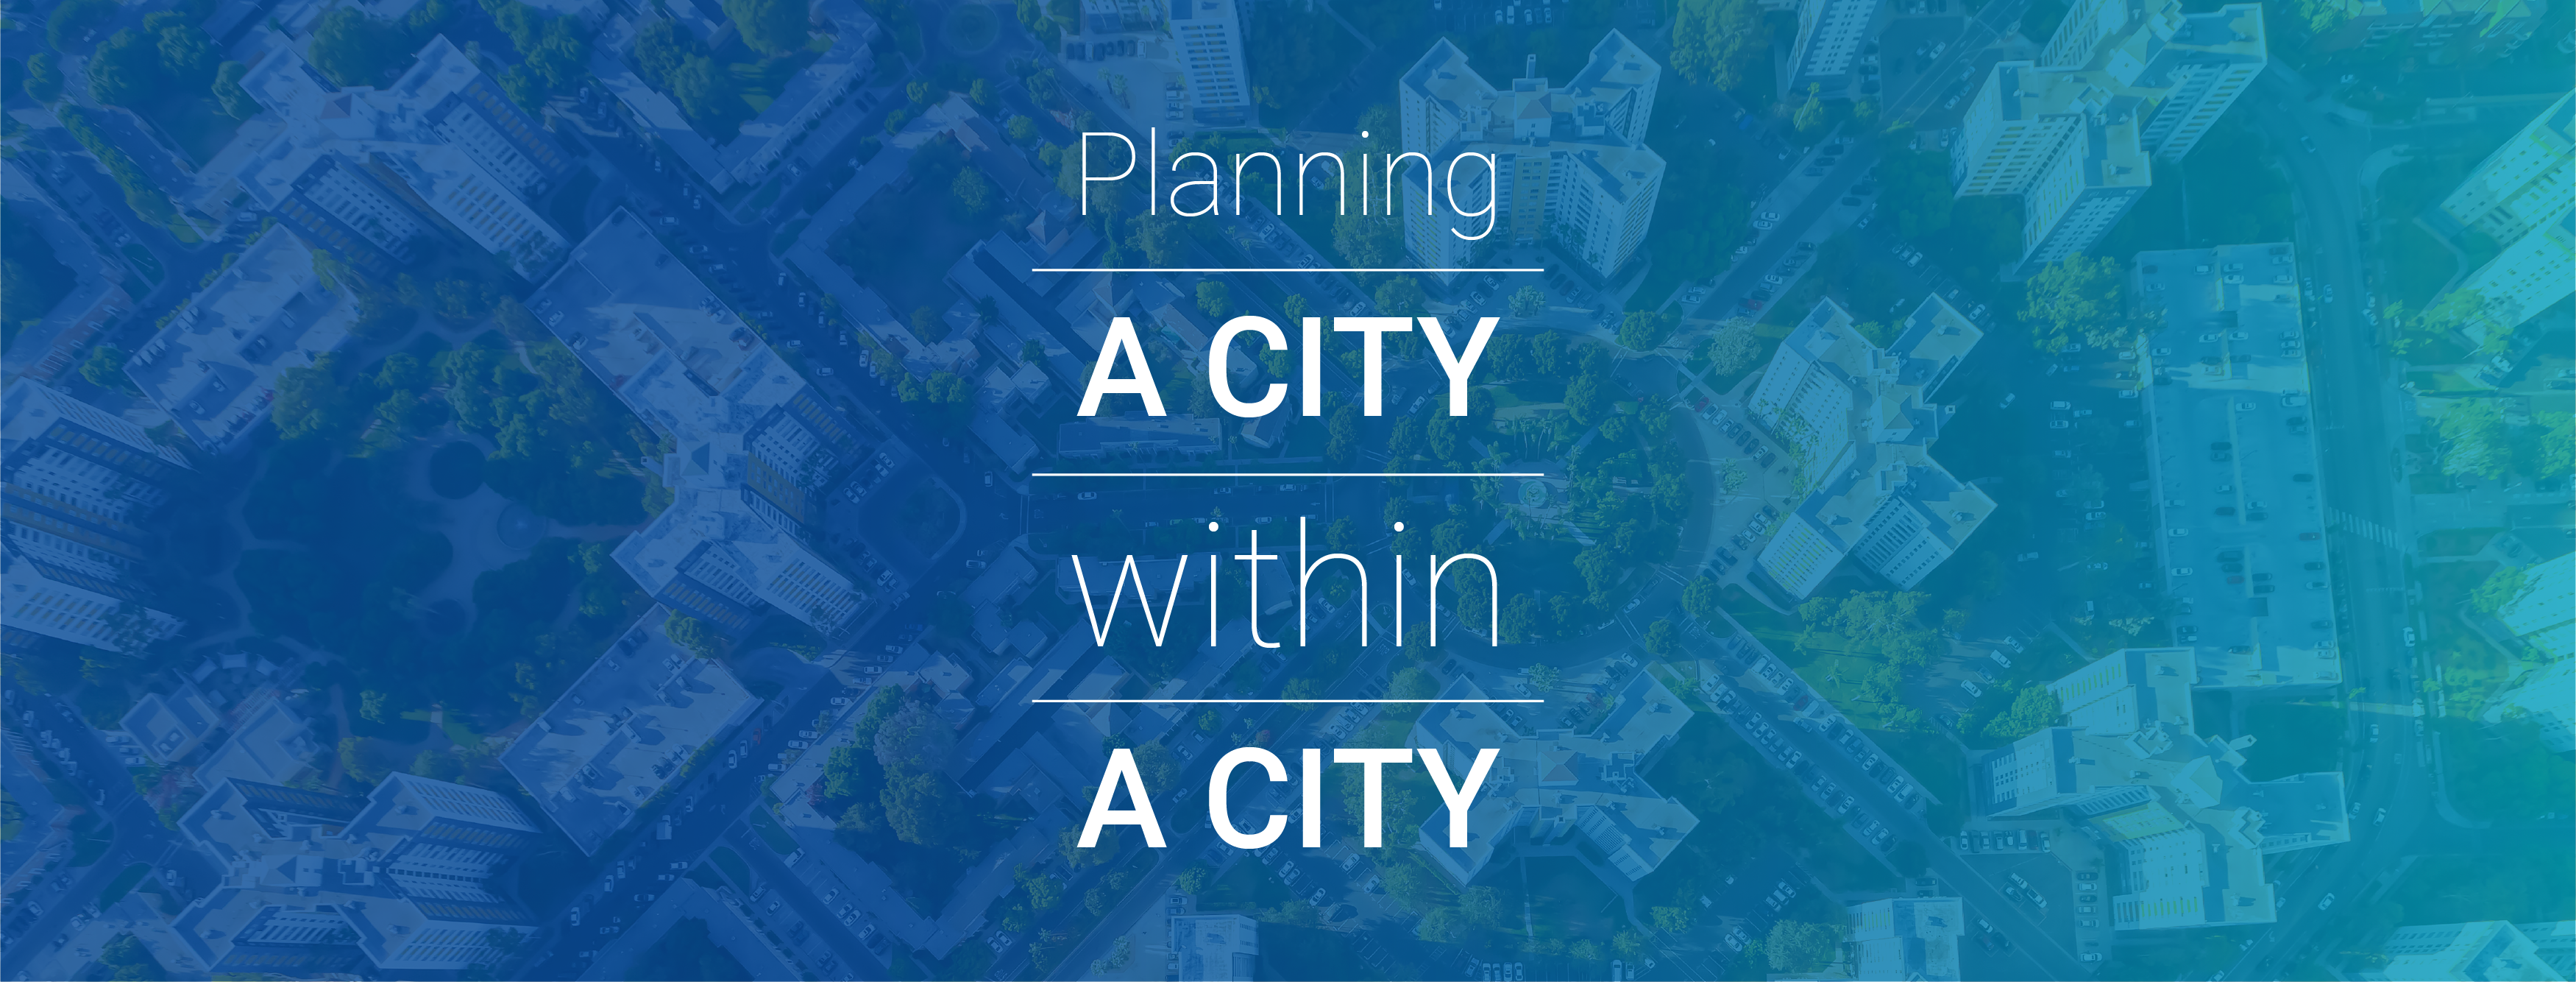 Planning a City within a City